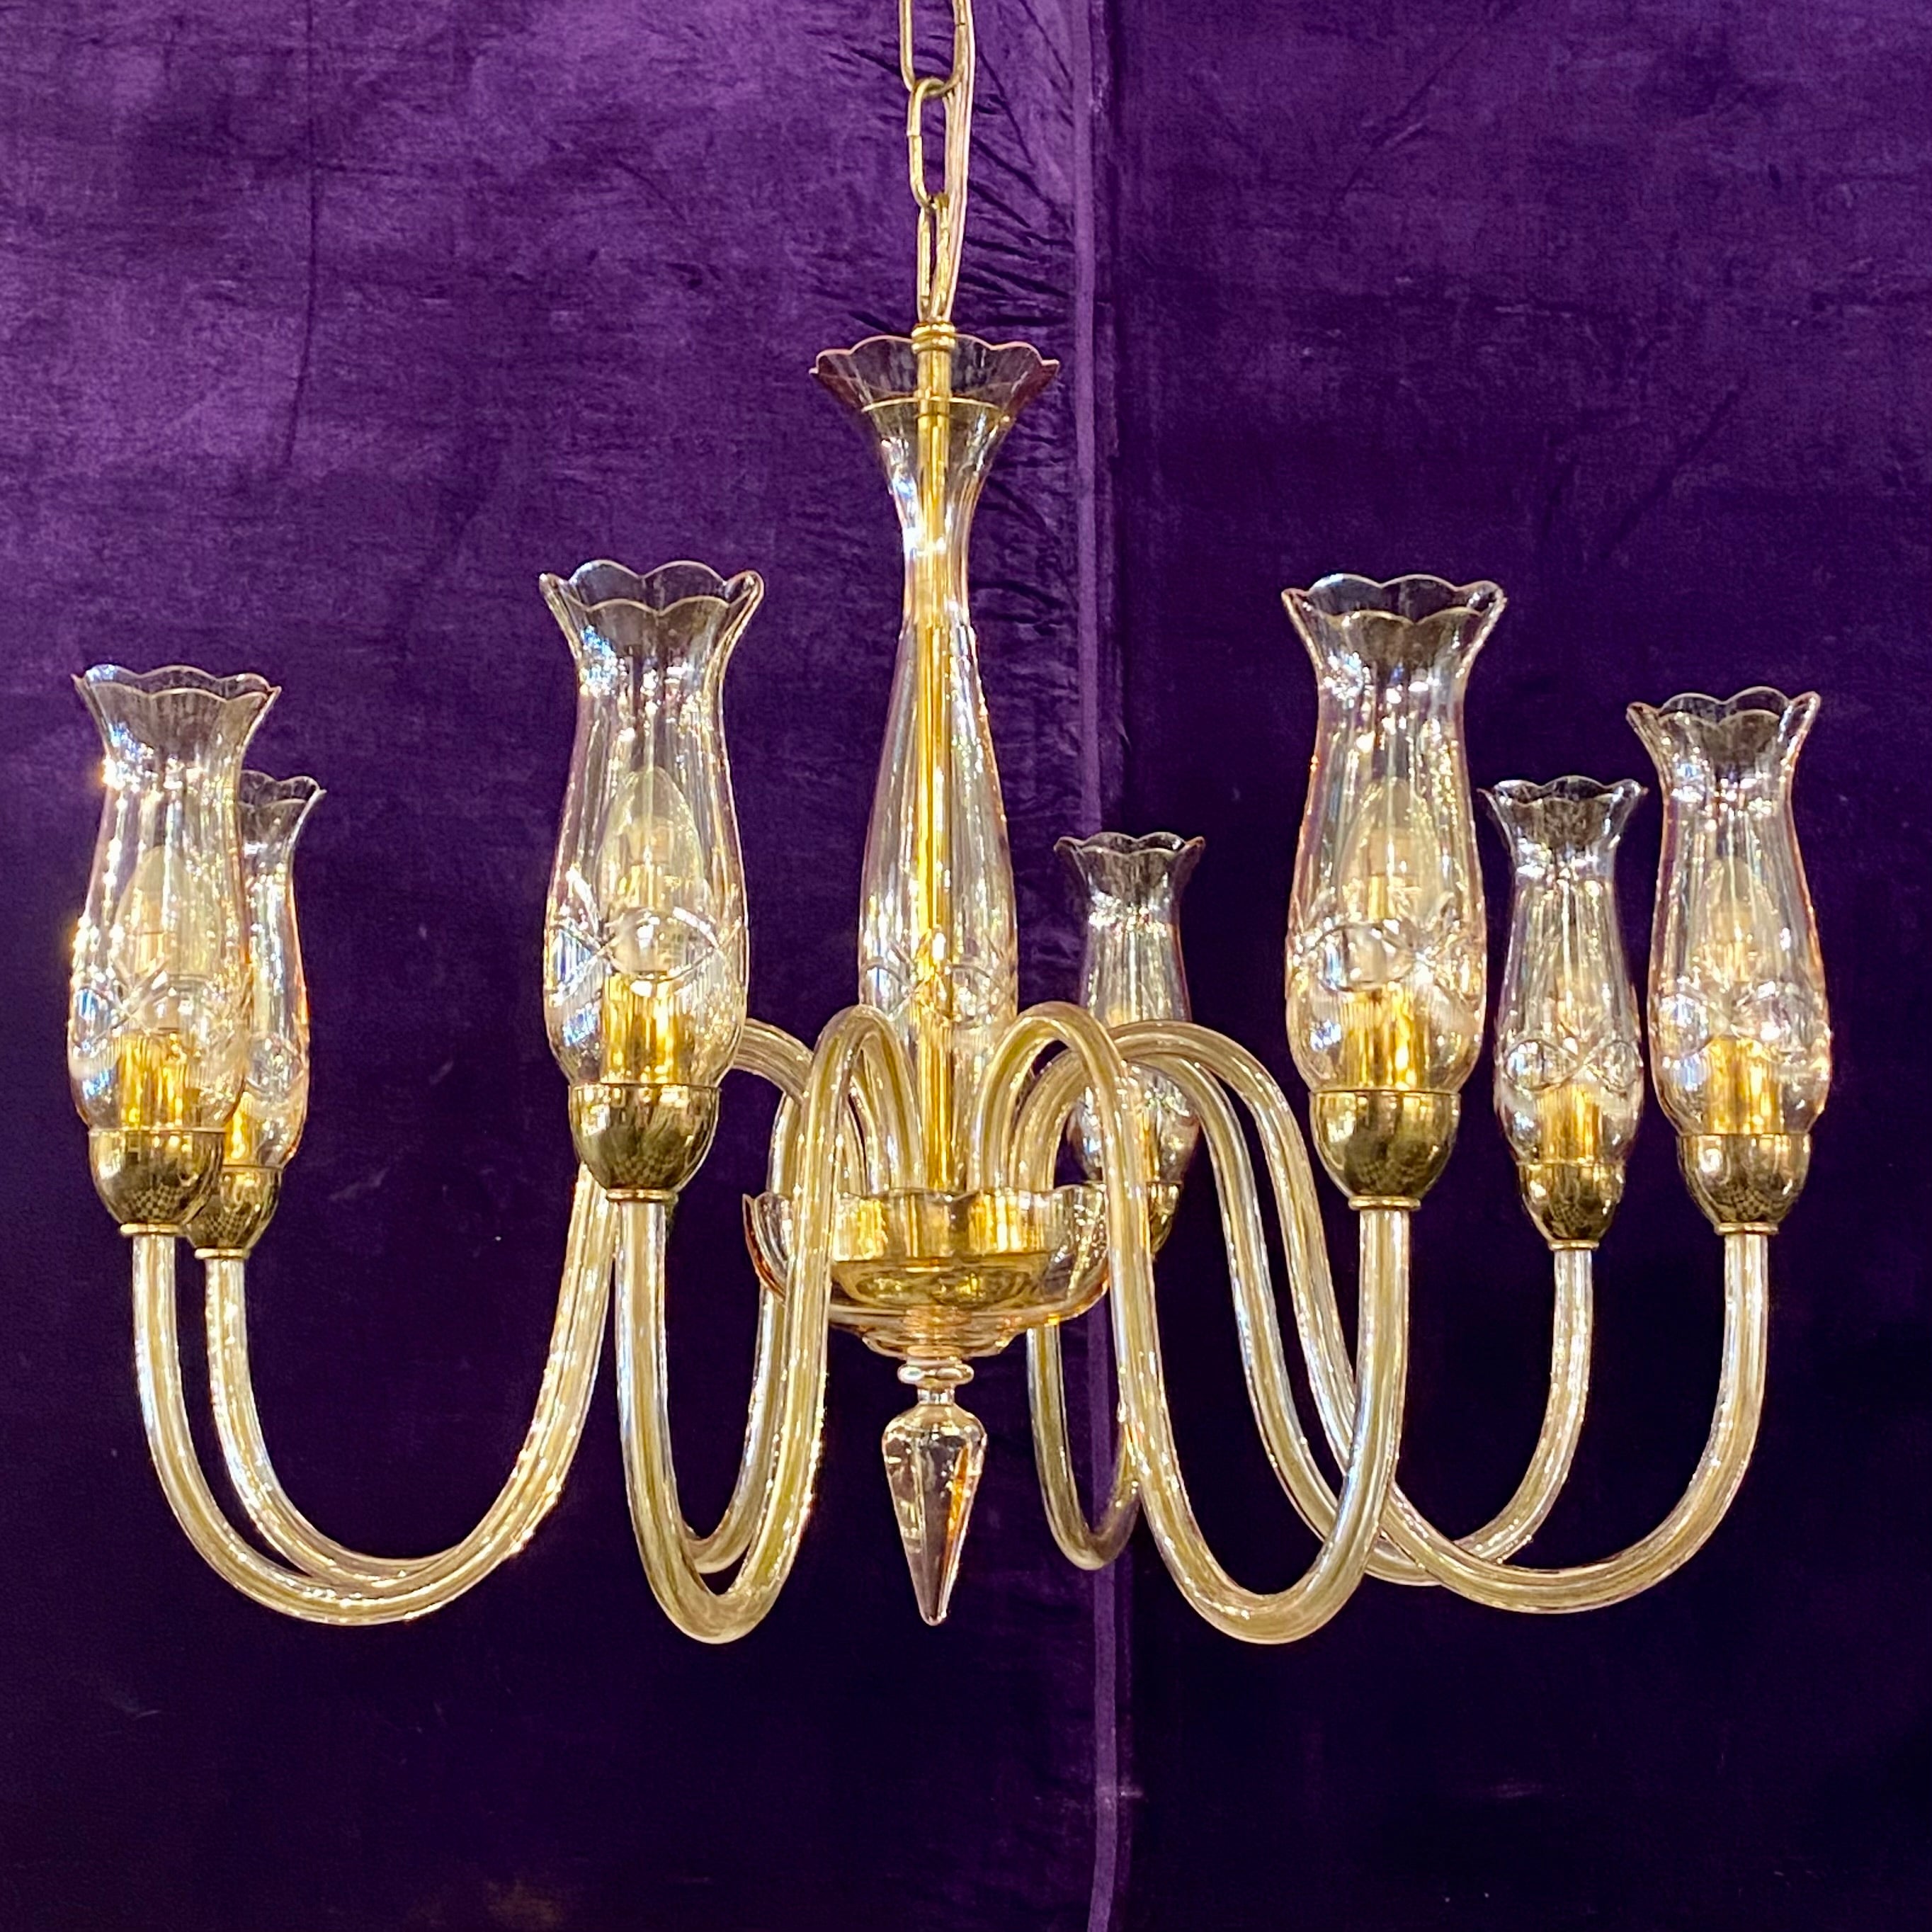 Antique Venetian Chandelier with Etched Shades